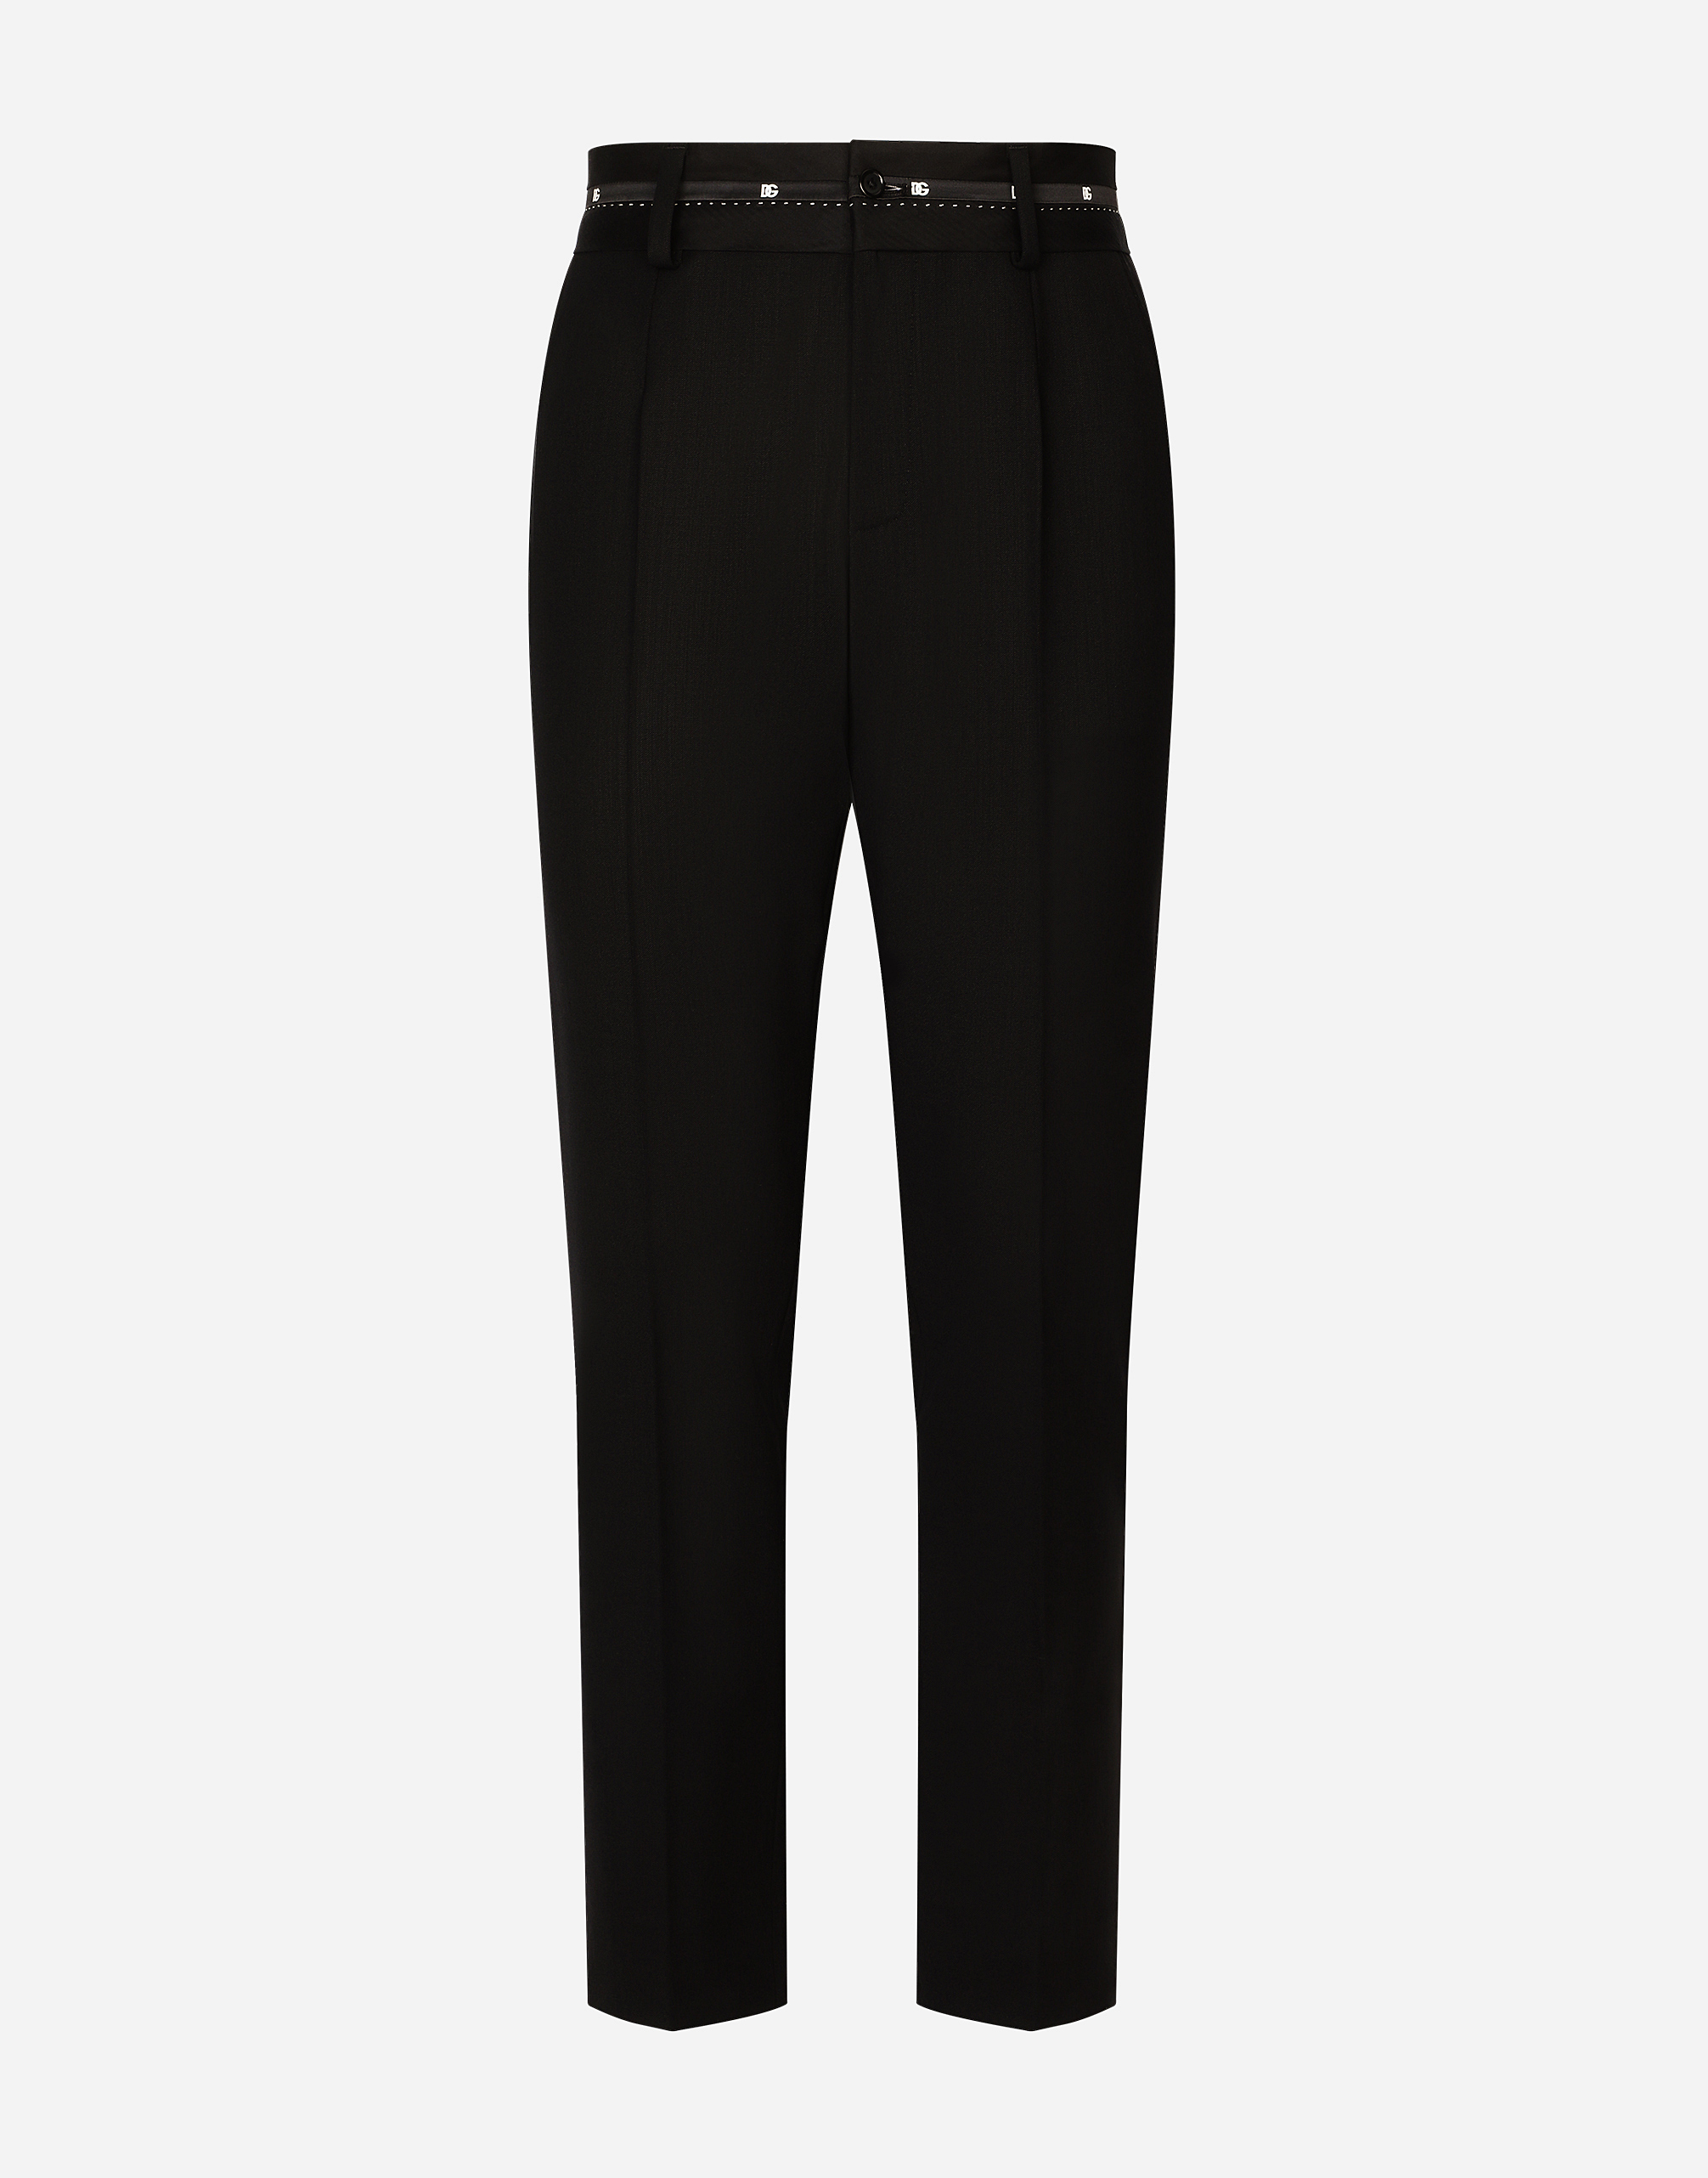 Stretch wool pants with branded waistband in Black